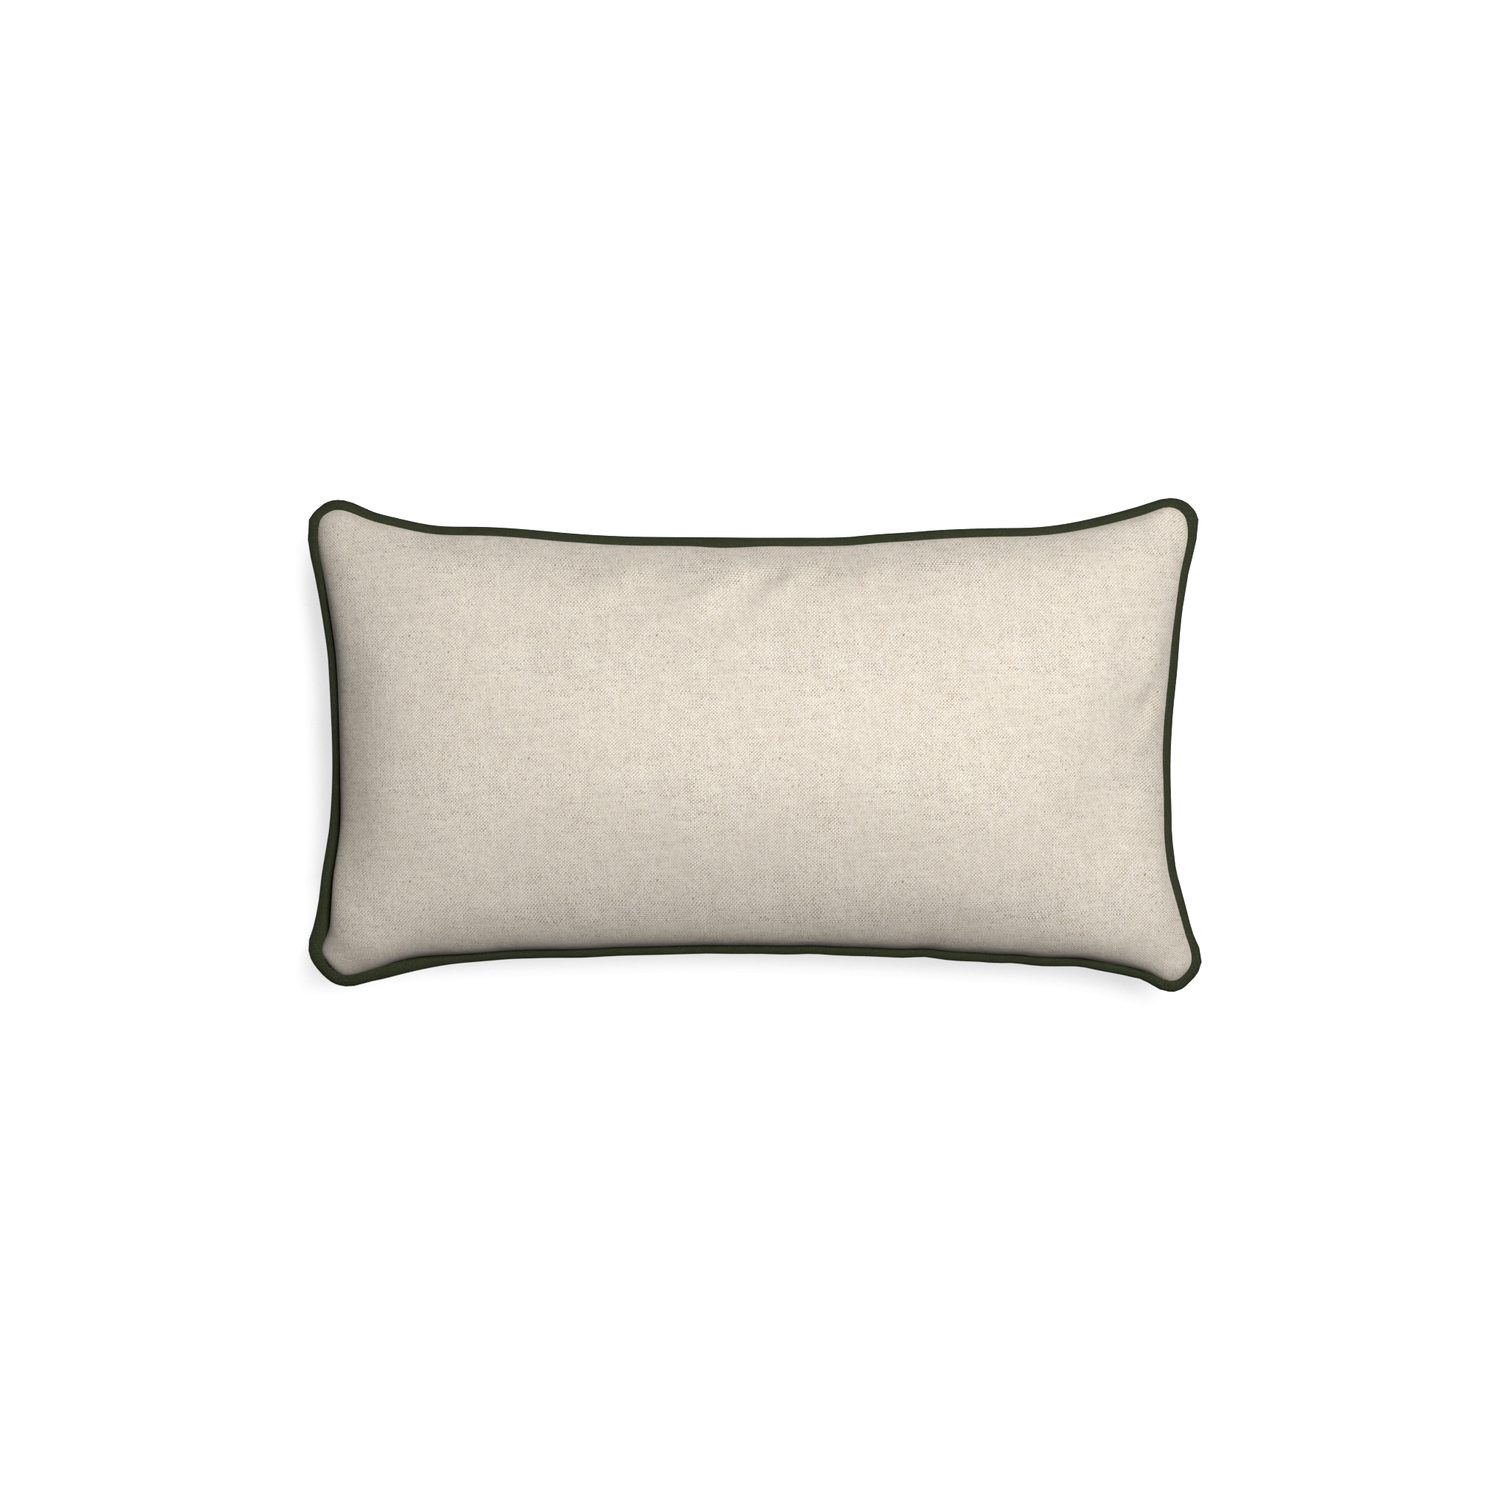 Petite-lumbar oat custom light brownpillow with f piping on white background